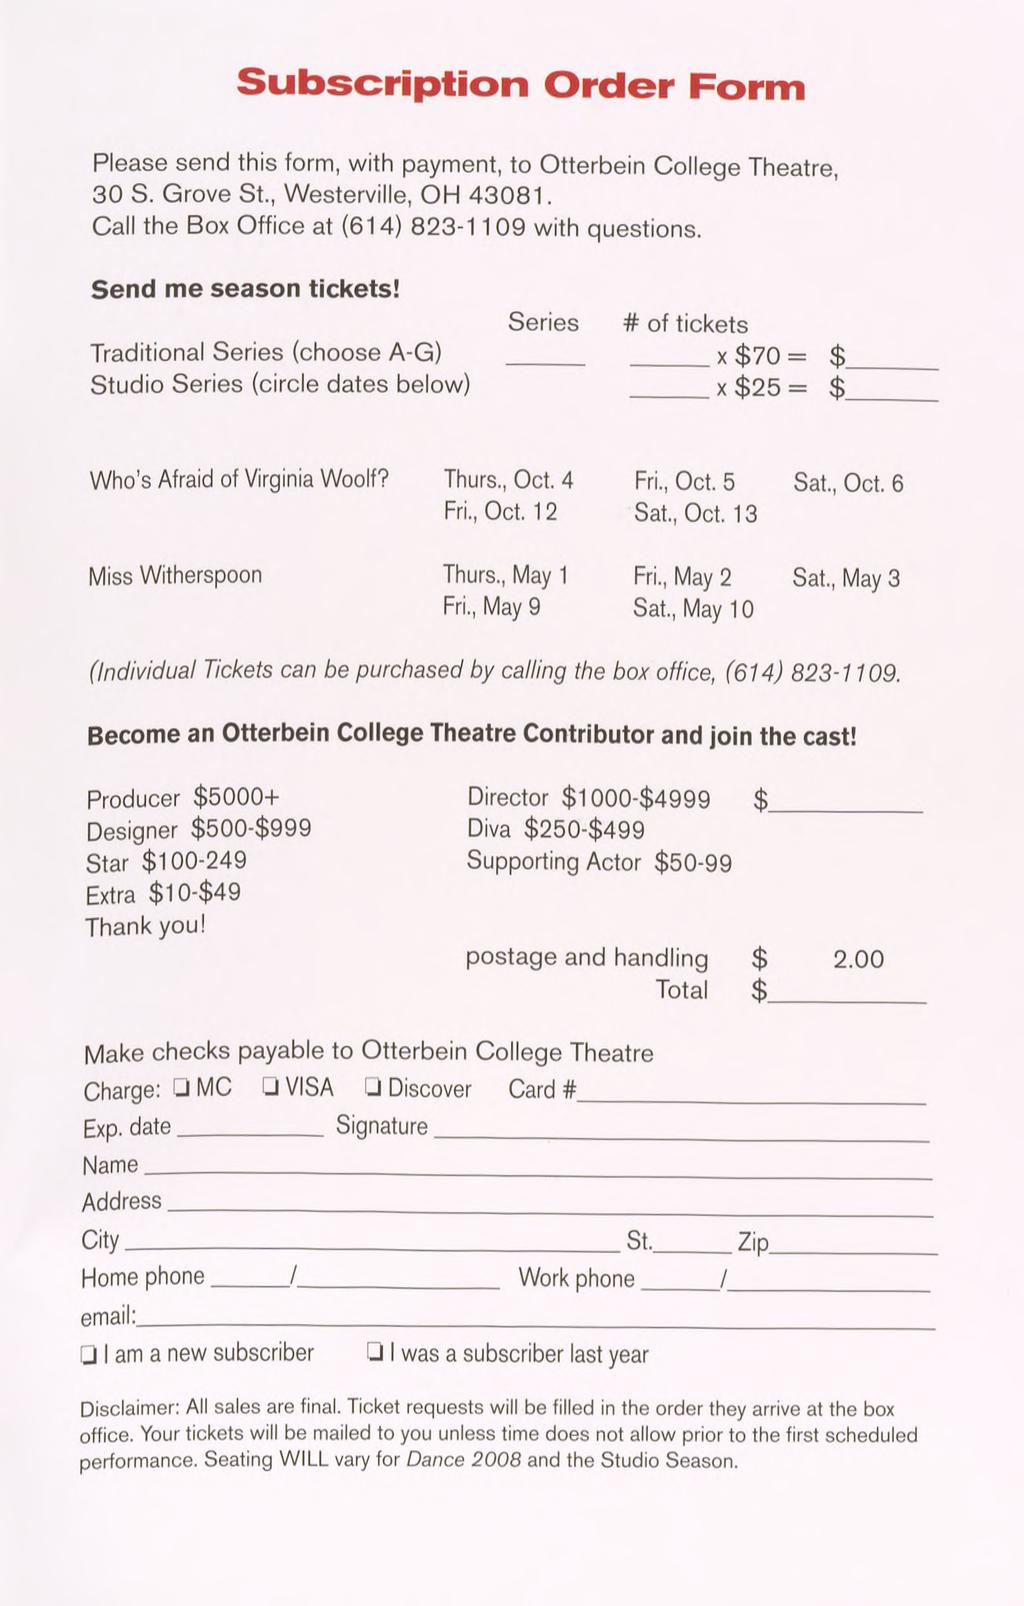 Subscription Order Form Please send this form, with payment, to Otterbein College Theatre, 30 S. Grove St., Westerville, OH 43081. Call the Box Office at (614) 823-1109 with questions.